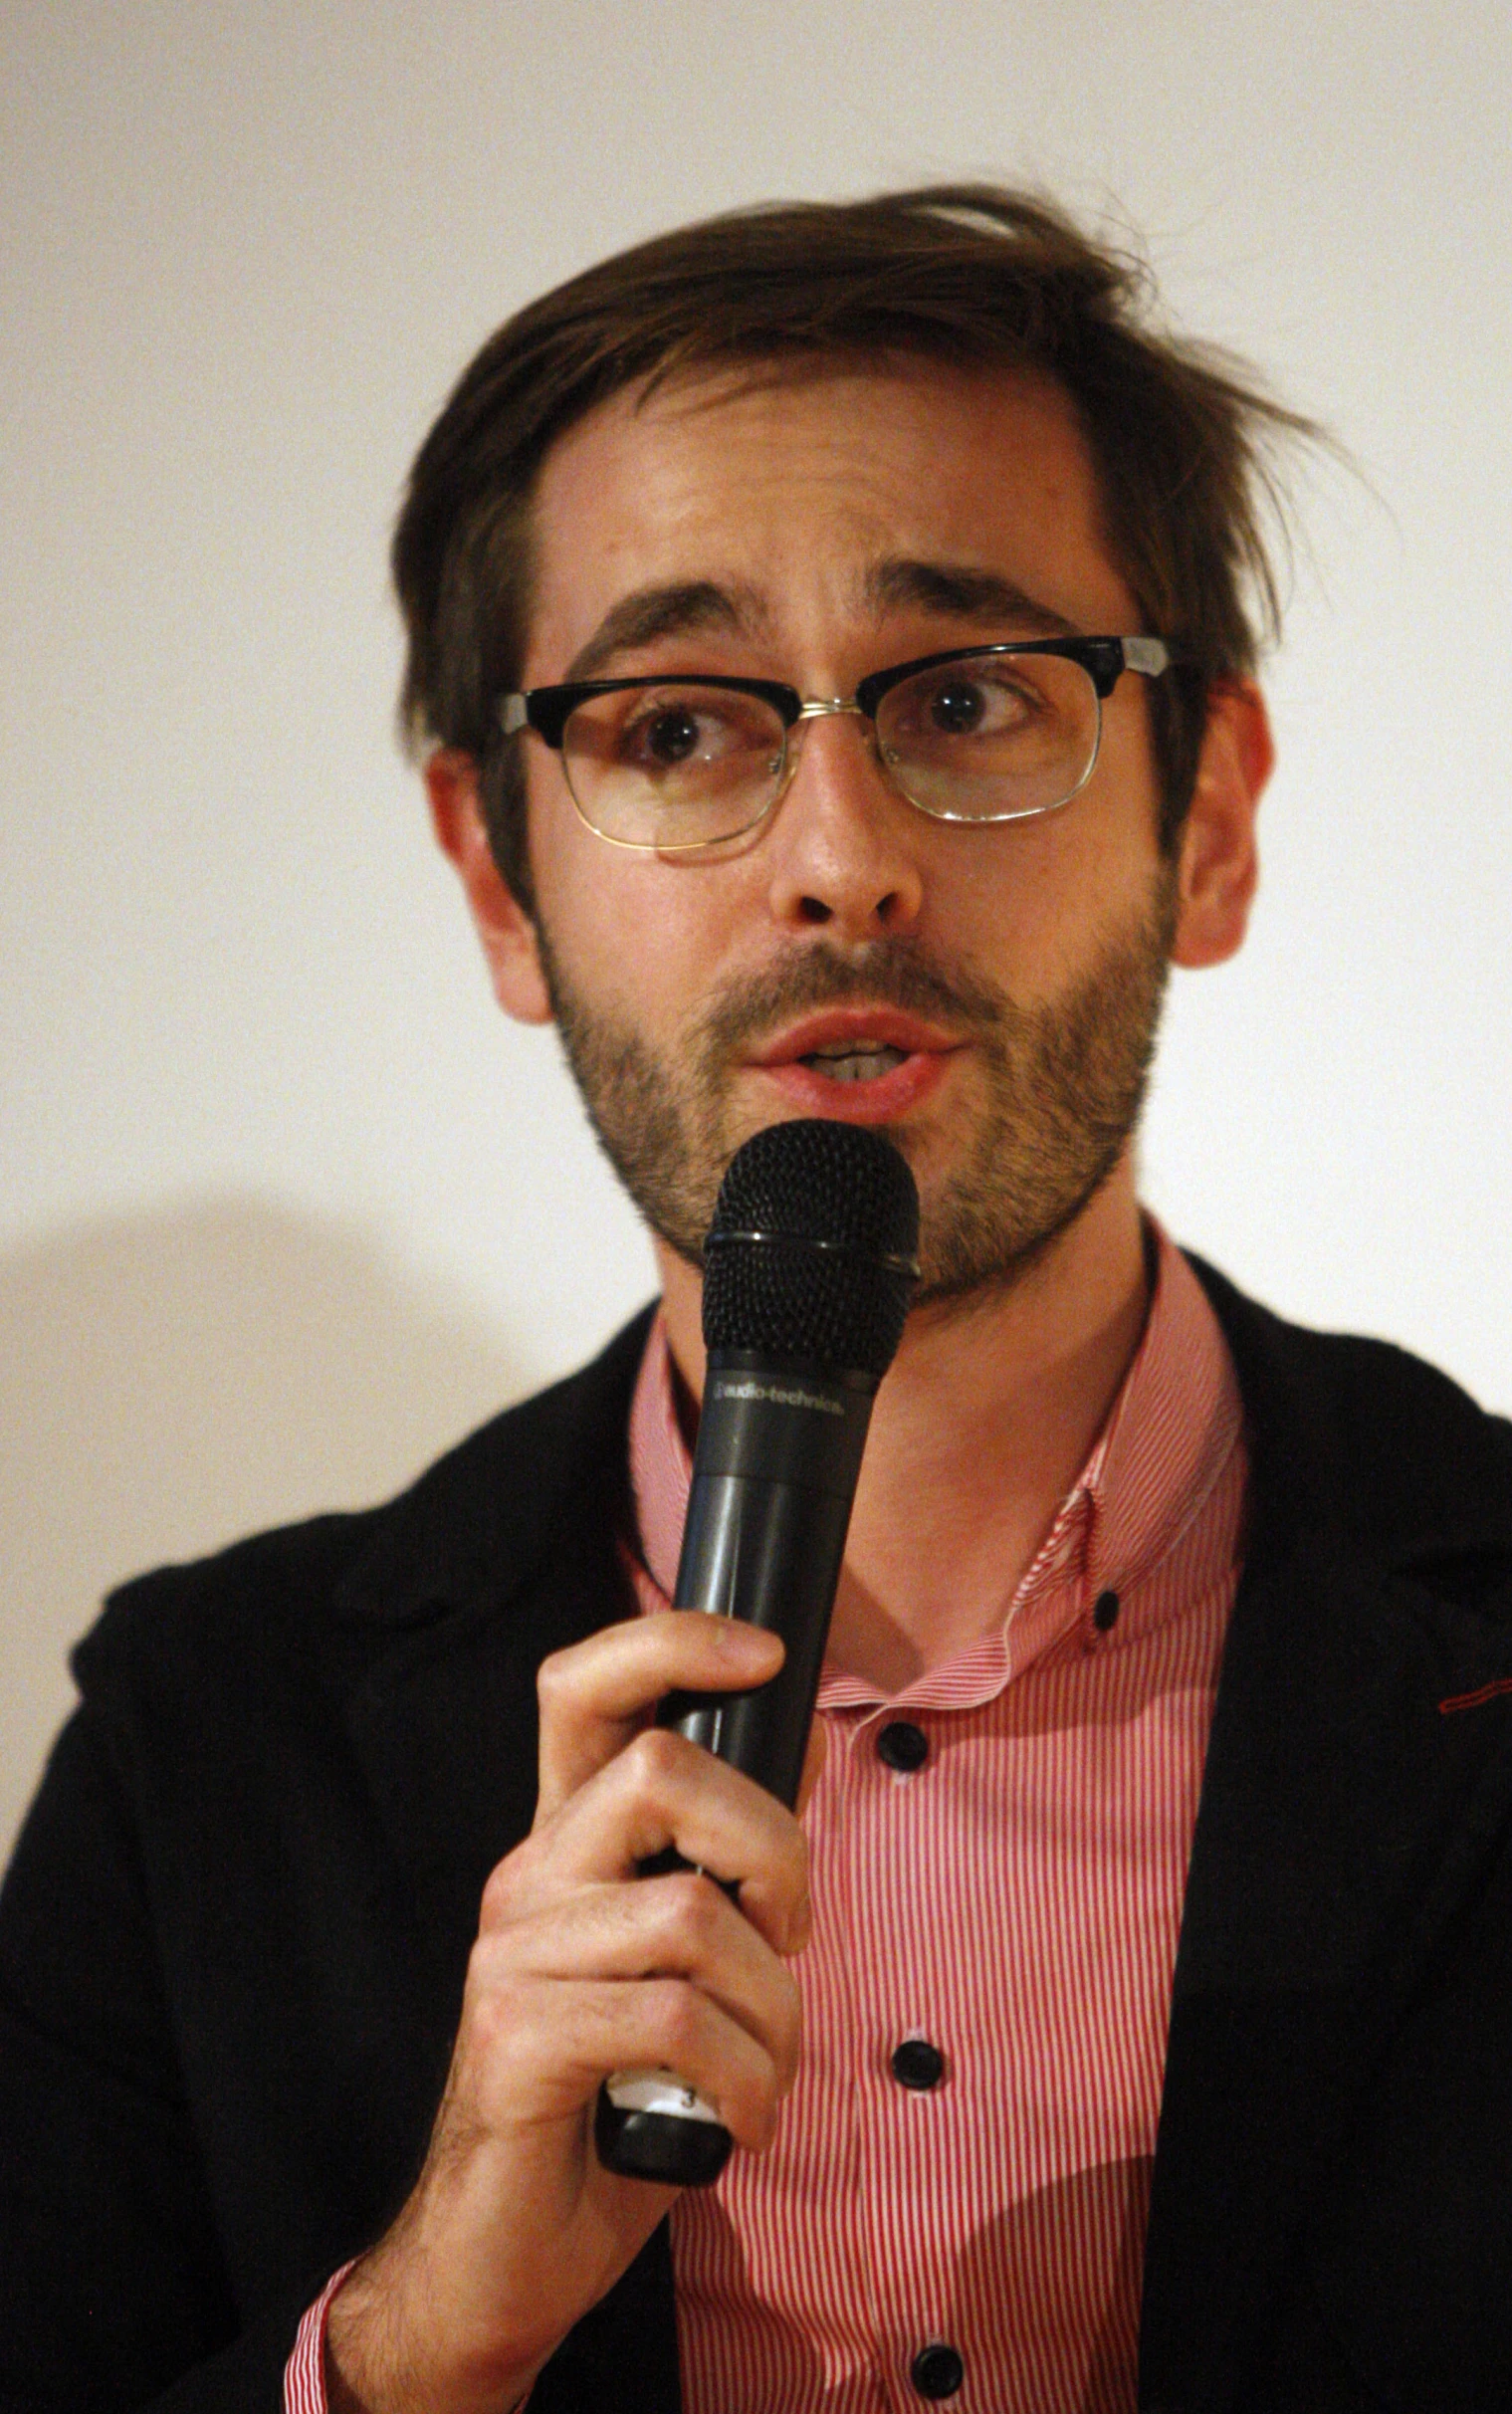 the man in glasses is talking on a microphone